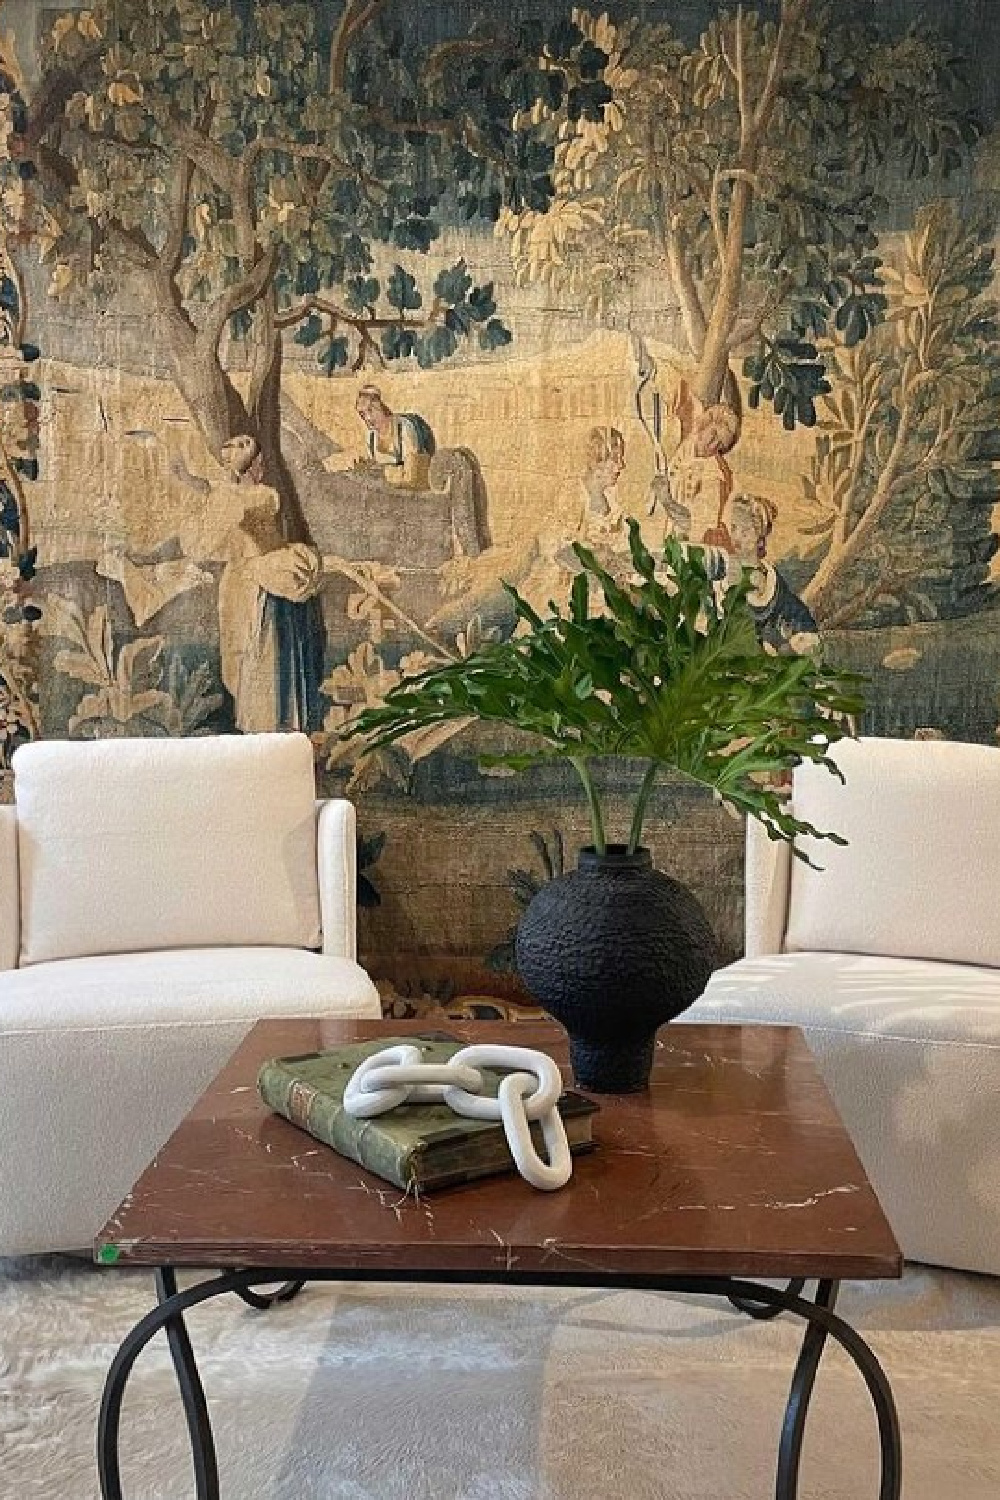 Tara Shaw design with antiques in a soulful arrangement for modern living. #tarashaw #livingwithantiques